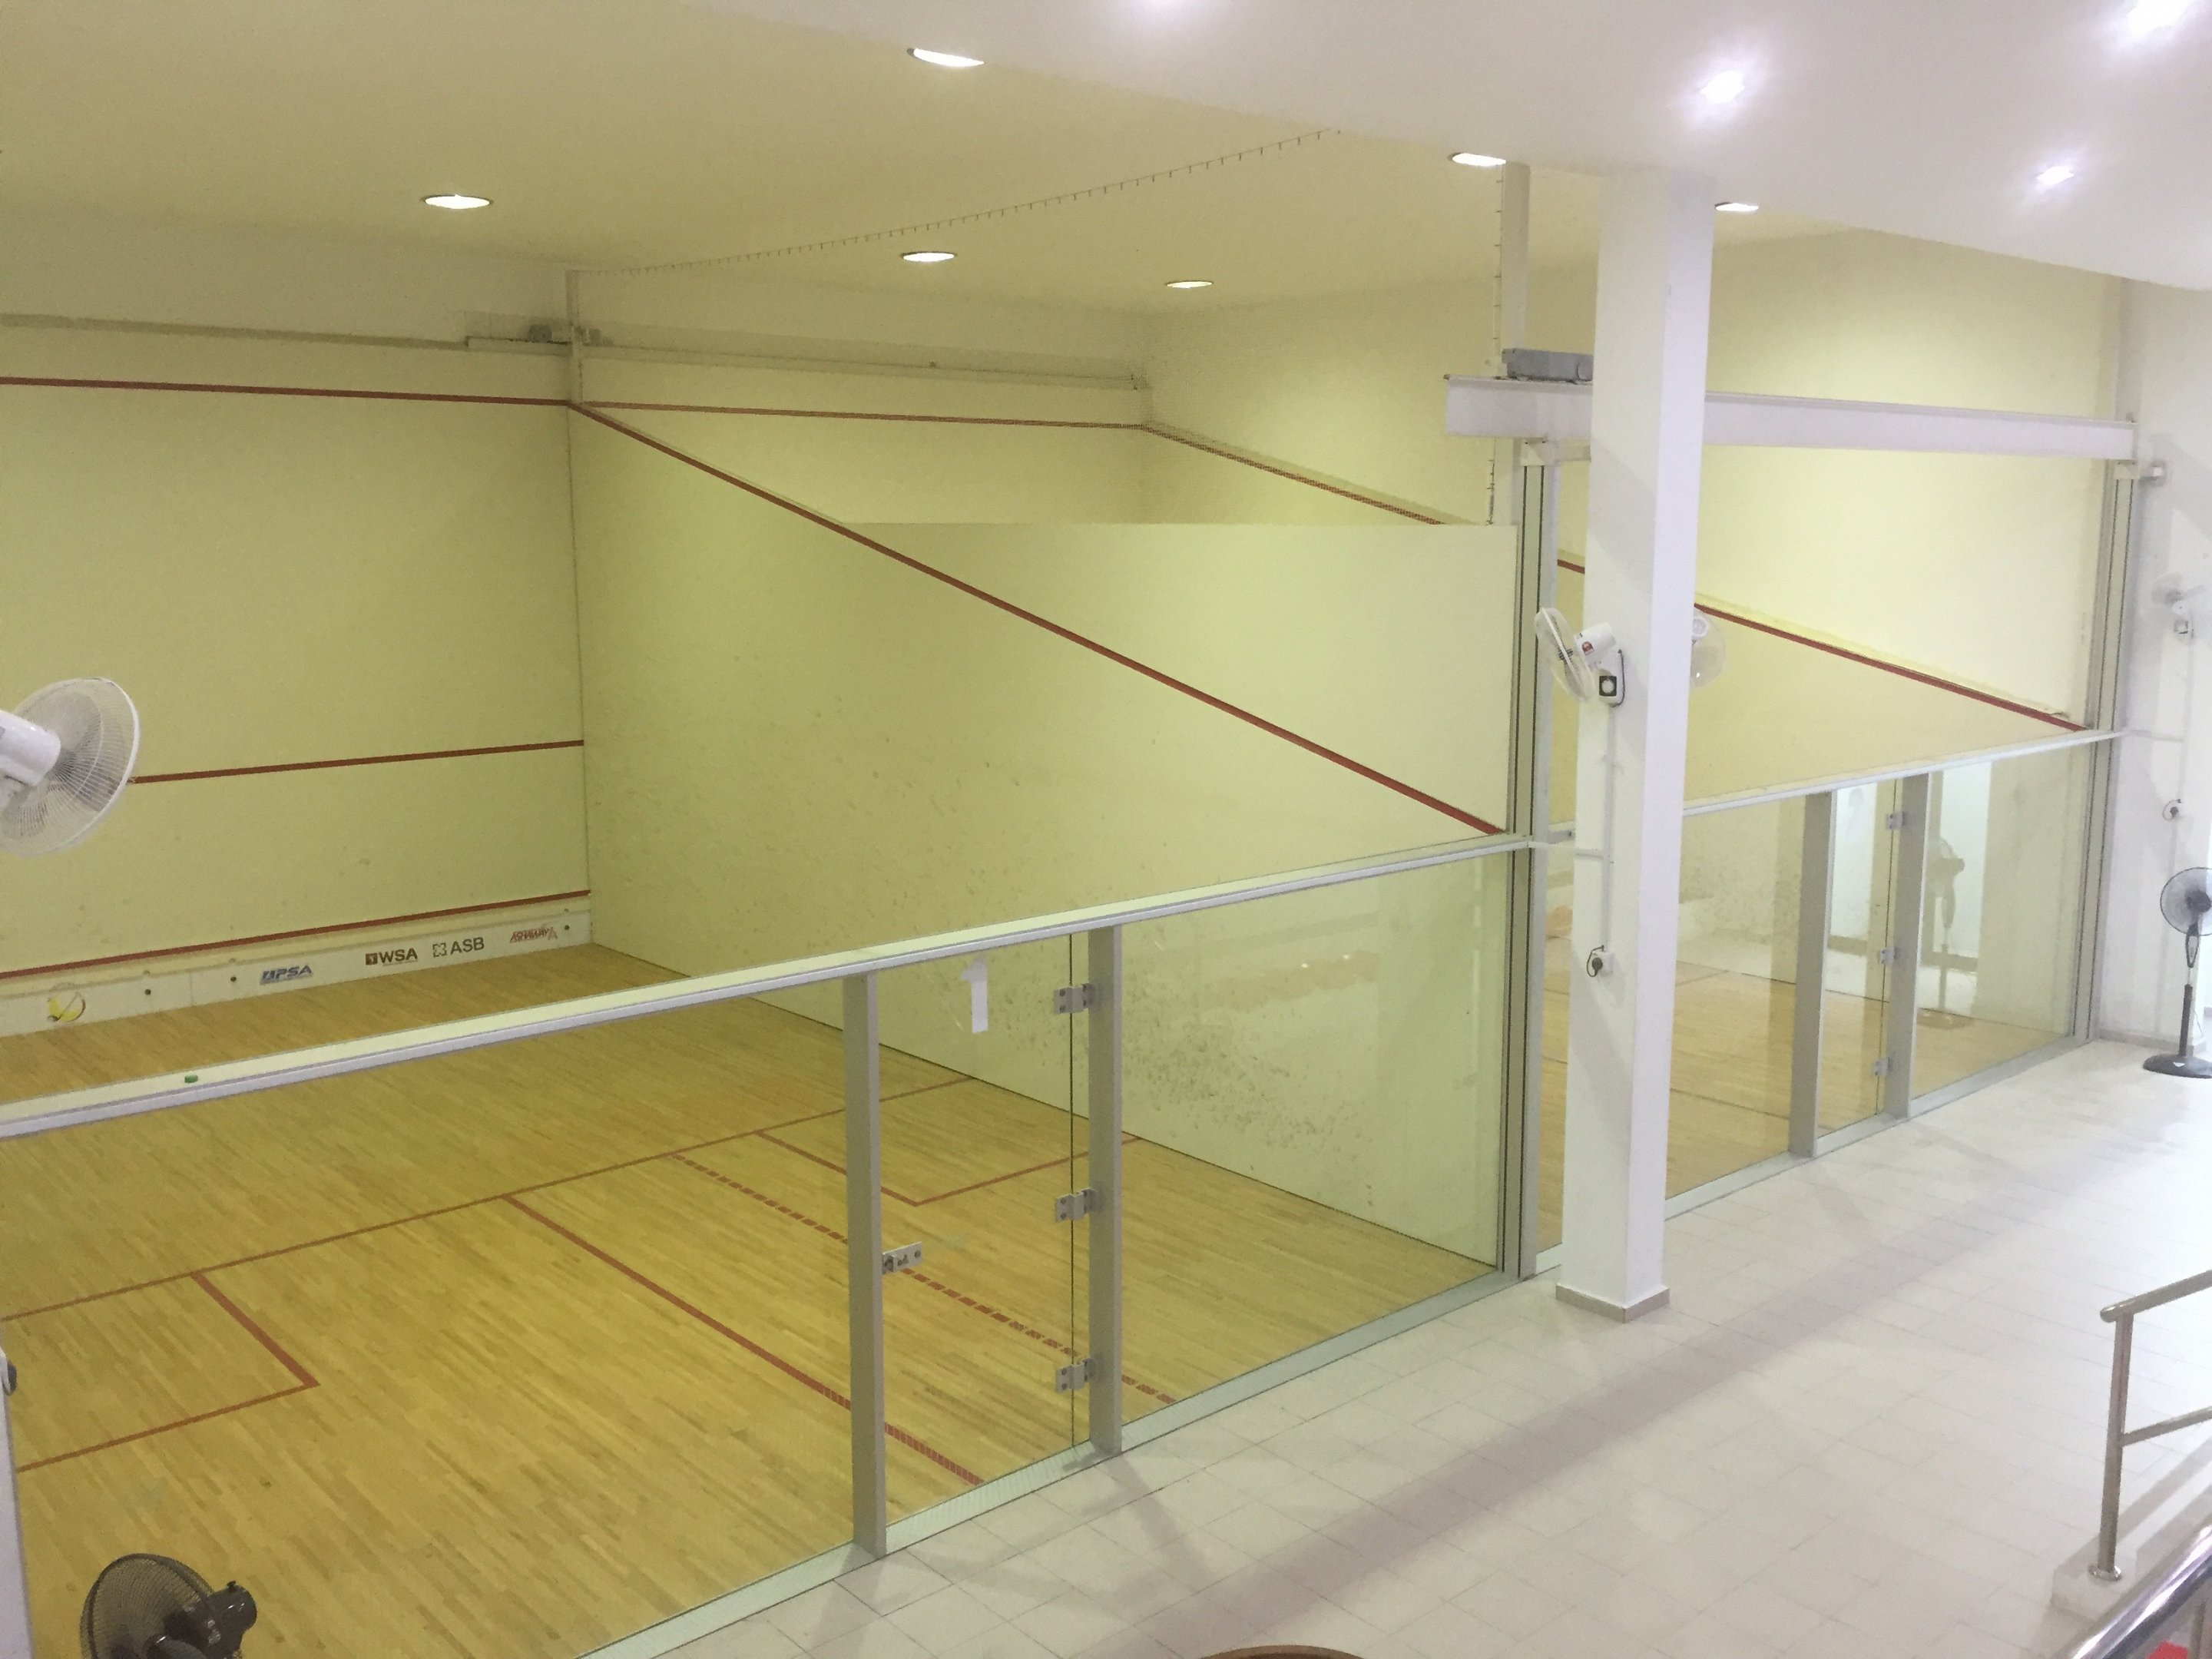 ASB Squash Courts - Squash Court What is the price for Squash Court?